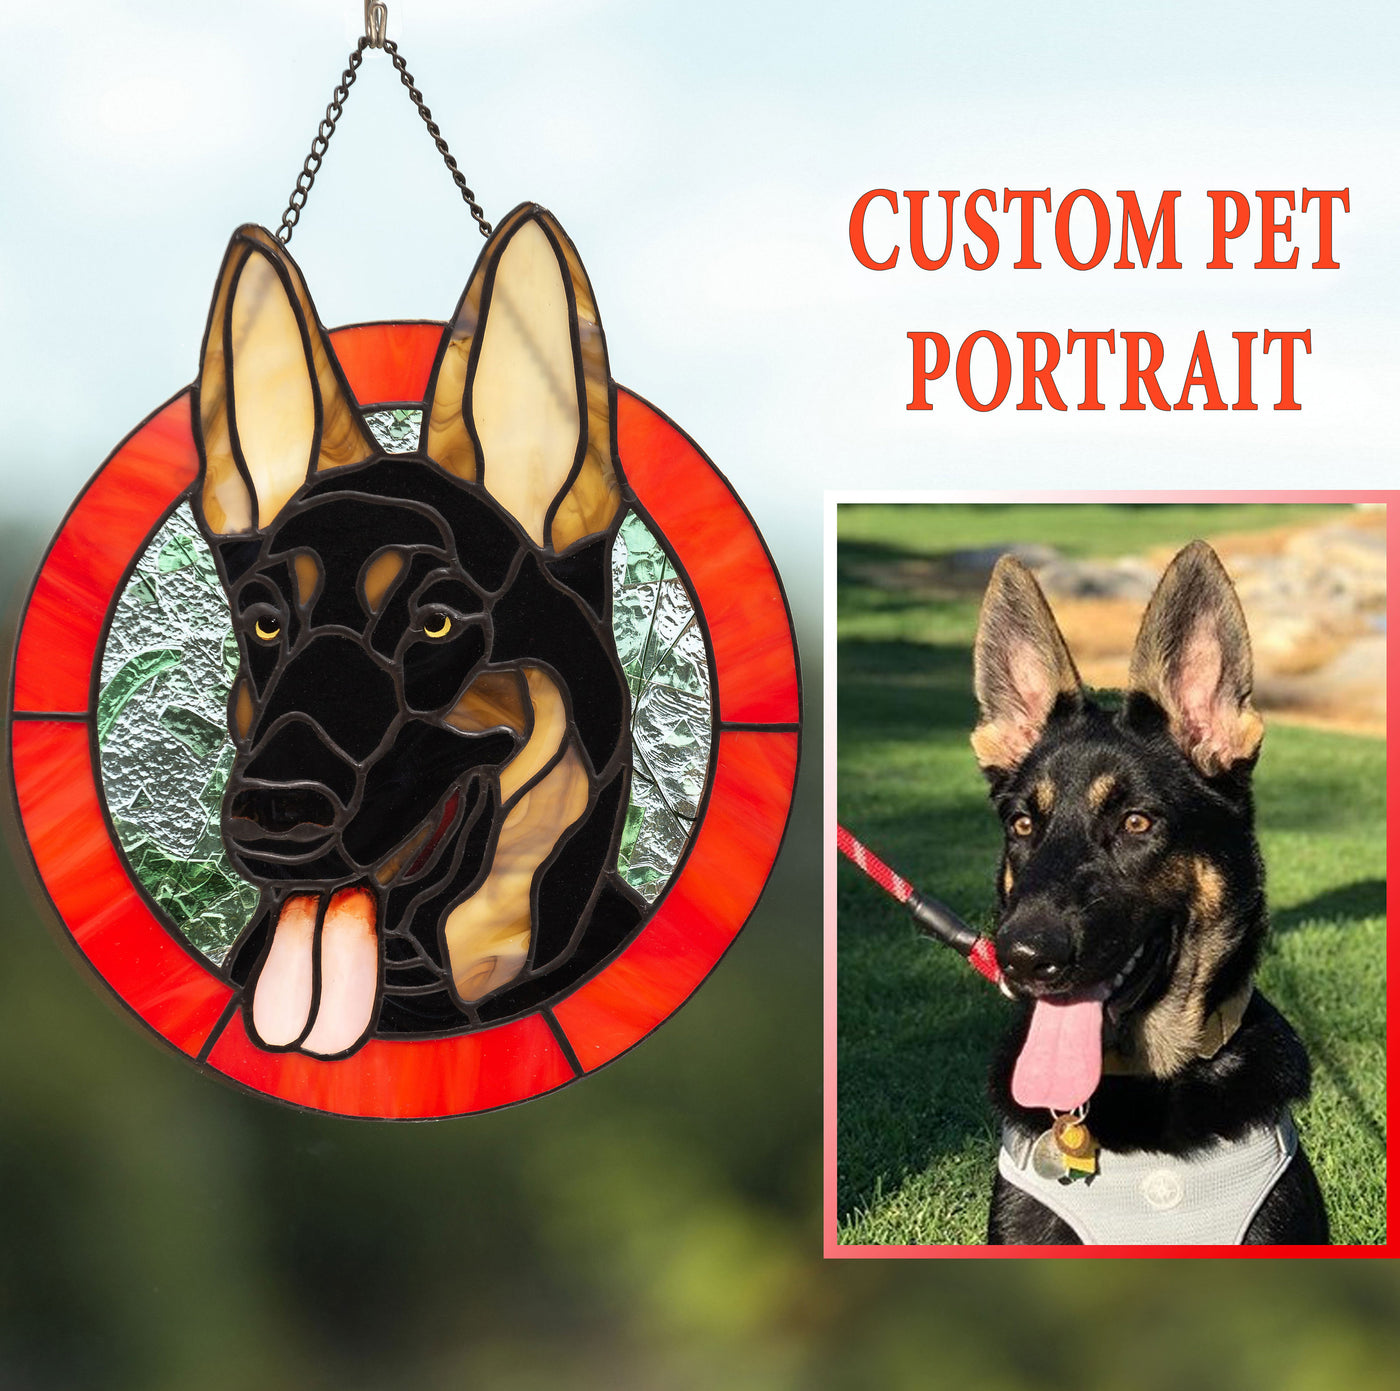 Stained glass round custom pet portrait of a dog 